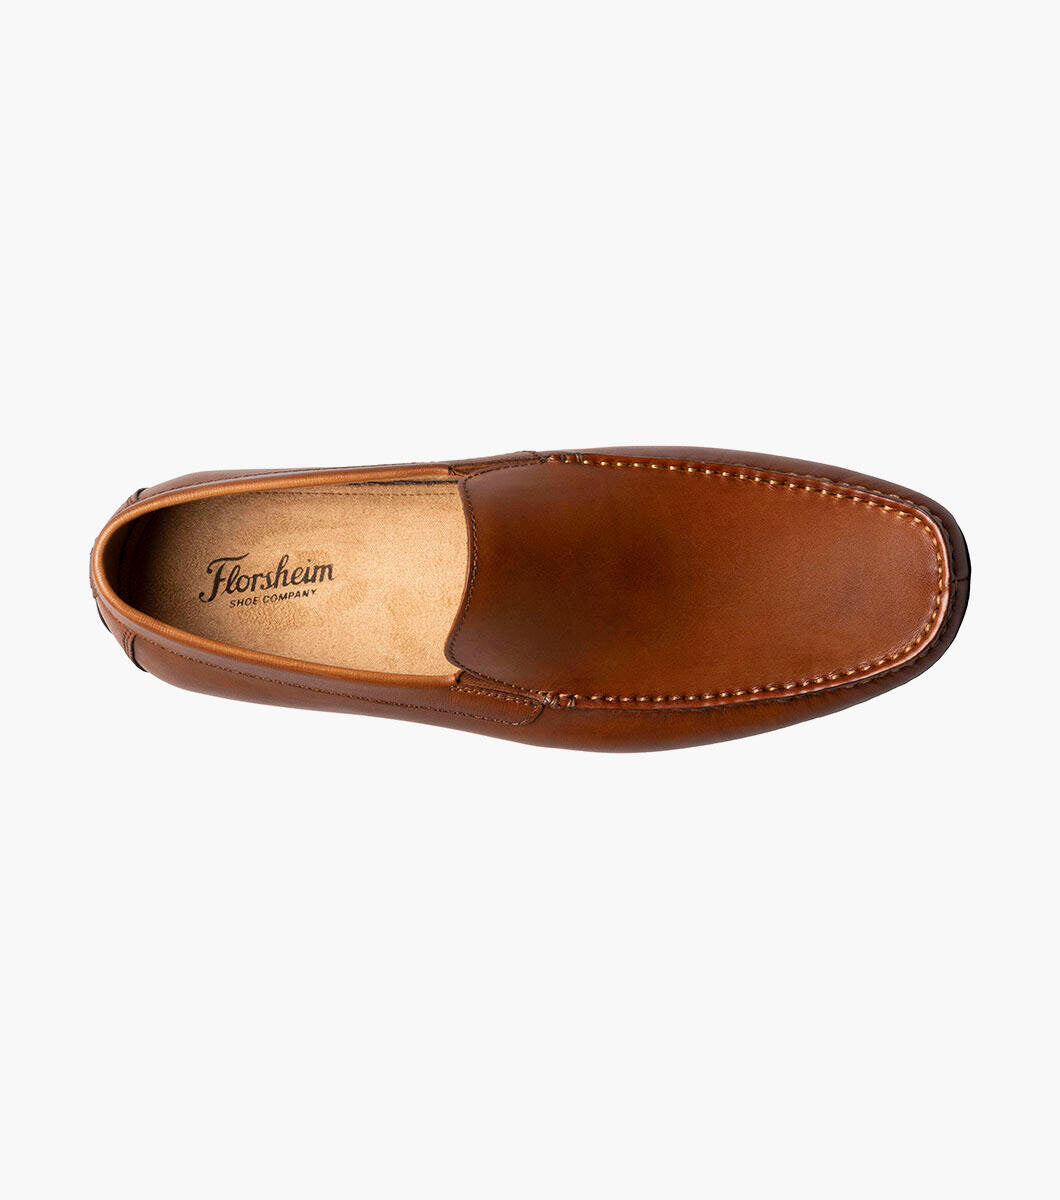 Get into the fashion fast lane with the Florsheim Talladega Moc Toe Venetian Driver. Made of beautiful materials on the upper, it also features the comfort of a fully cushioned footbed and soft Suedetec linings.